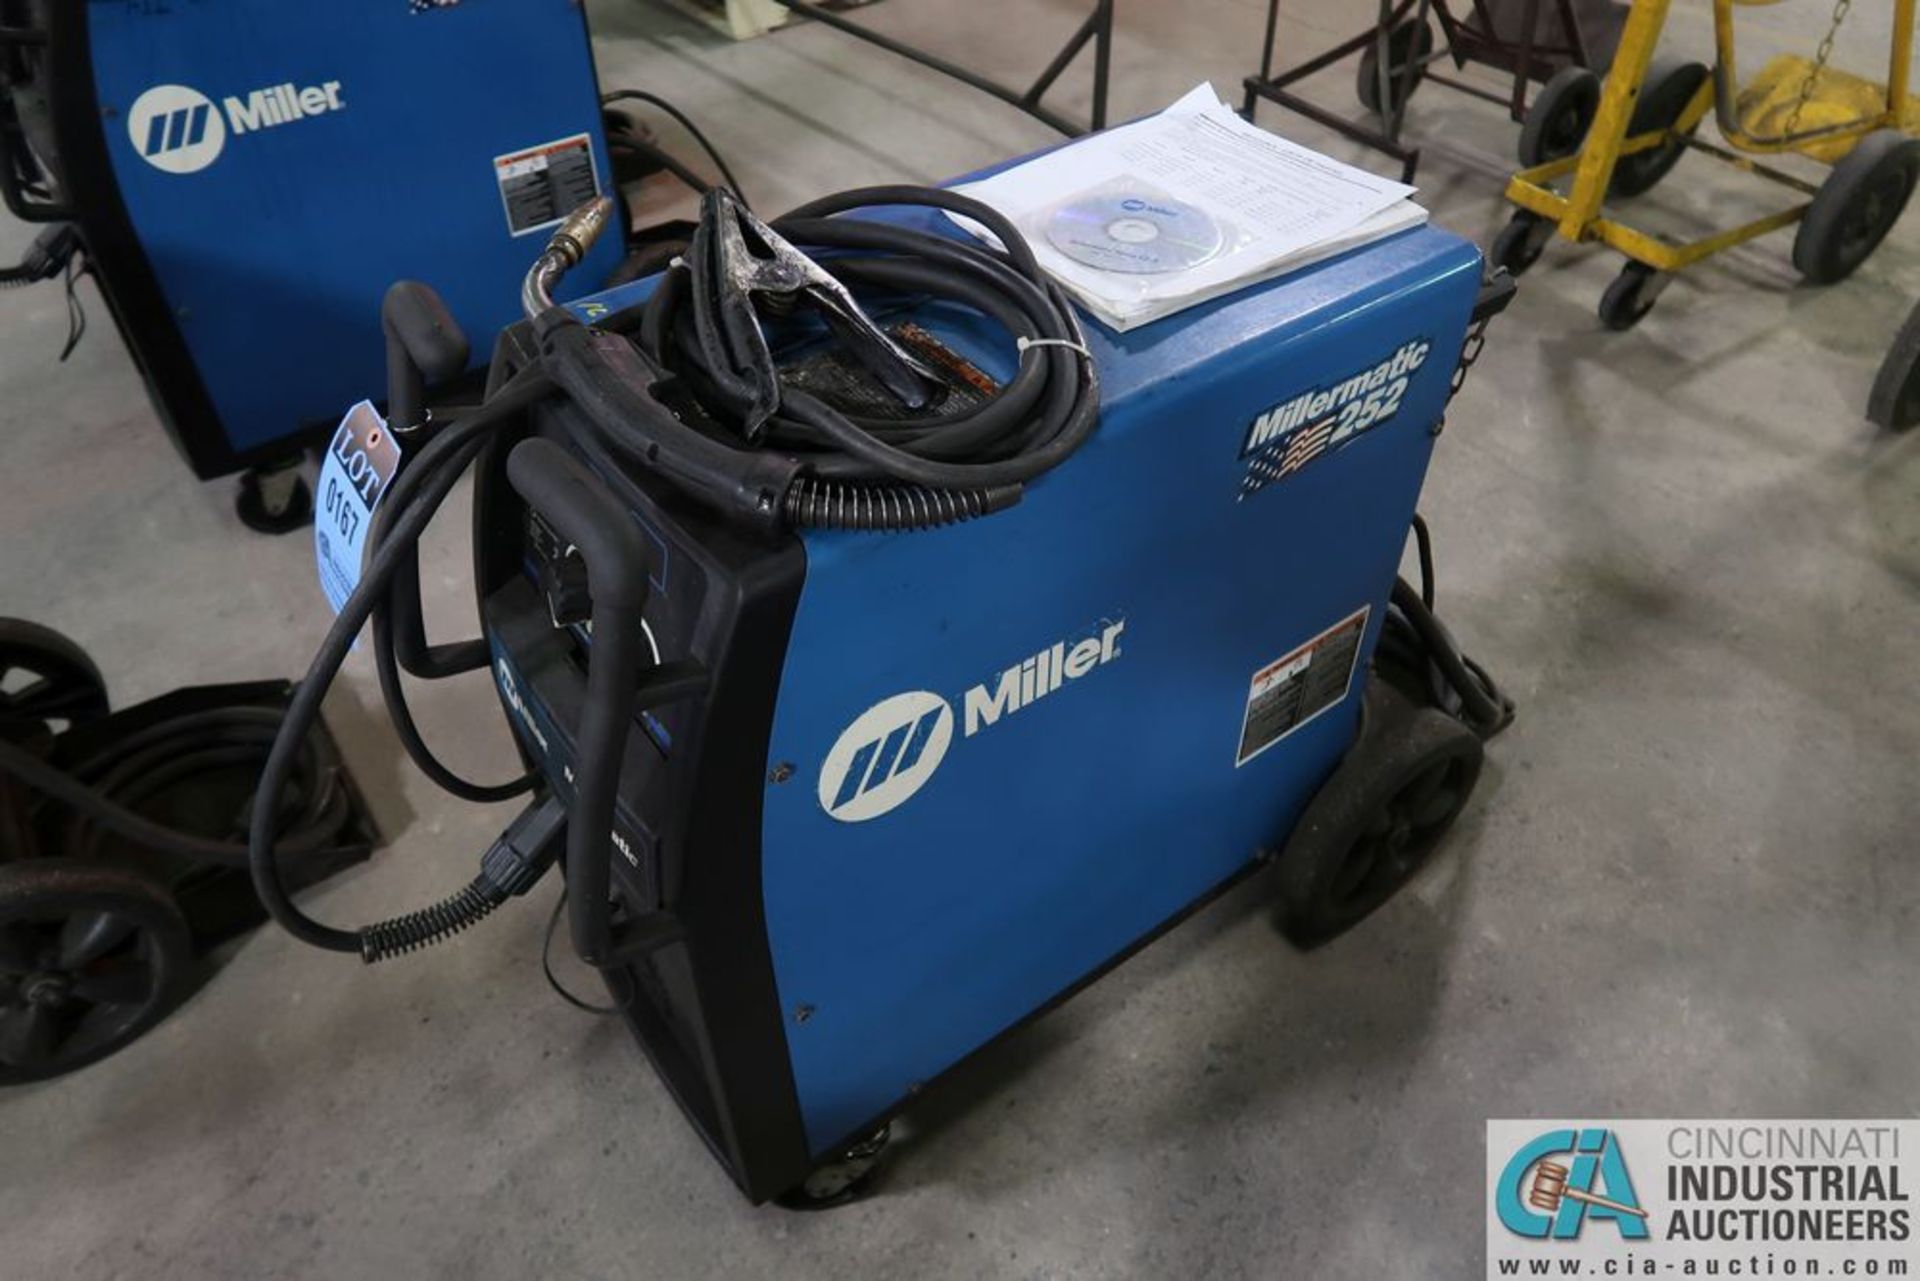 250 AMP MILLER MODEL MILLERMATIC 252 MIG WELDING POWER SOURCE; S/N MA190309N, WITH BUILT-IN WIRE - Image 3 of 7